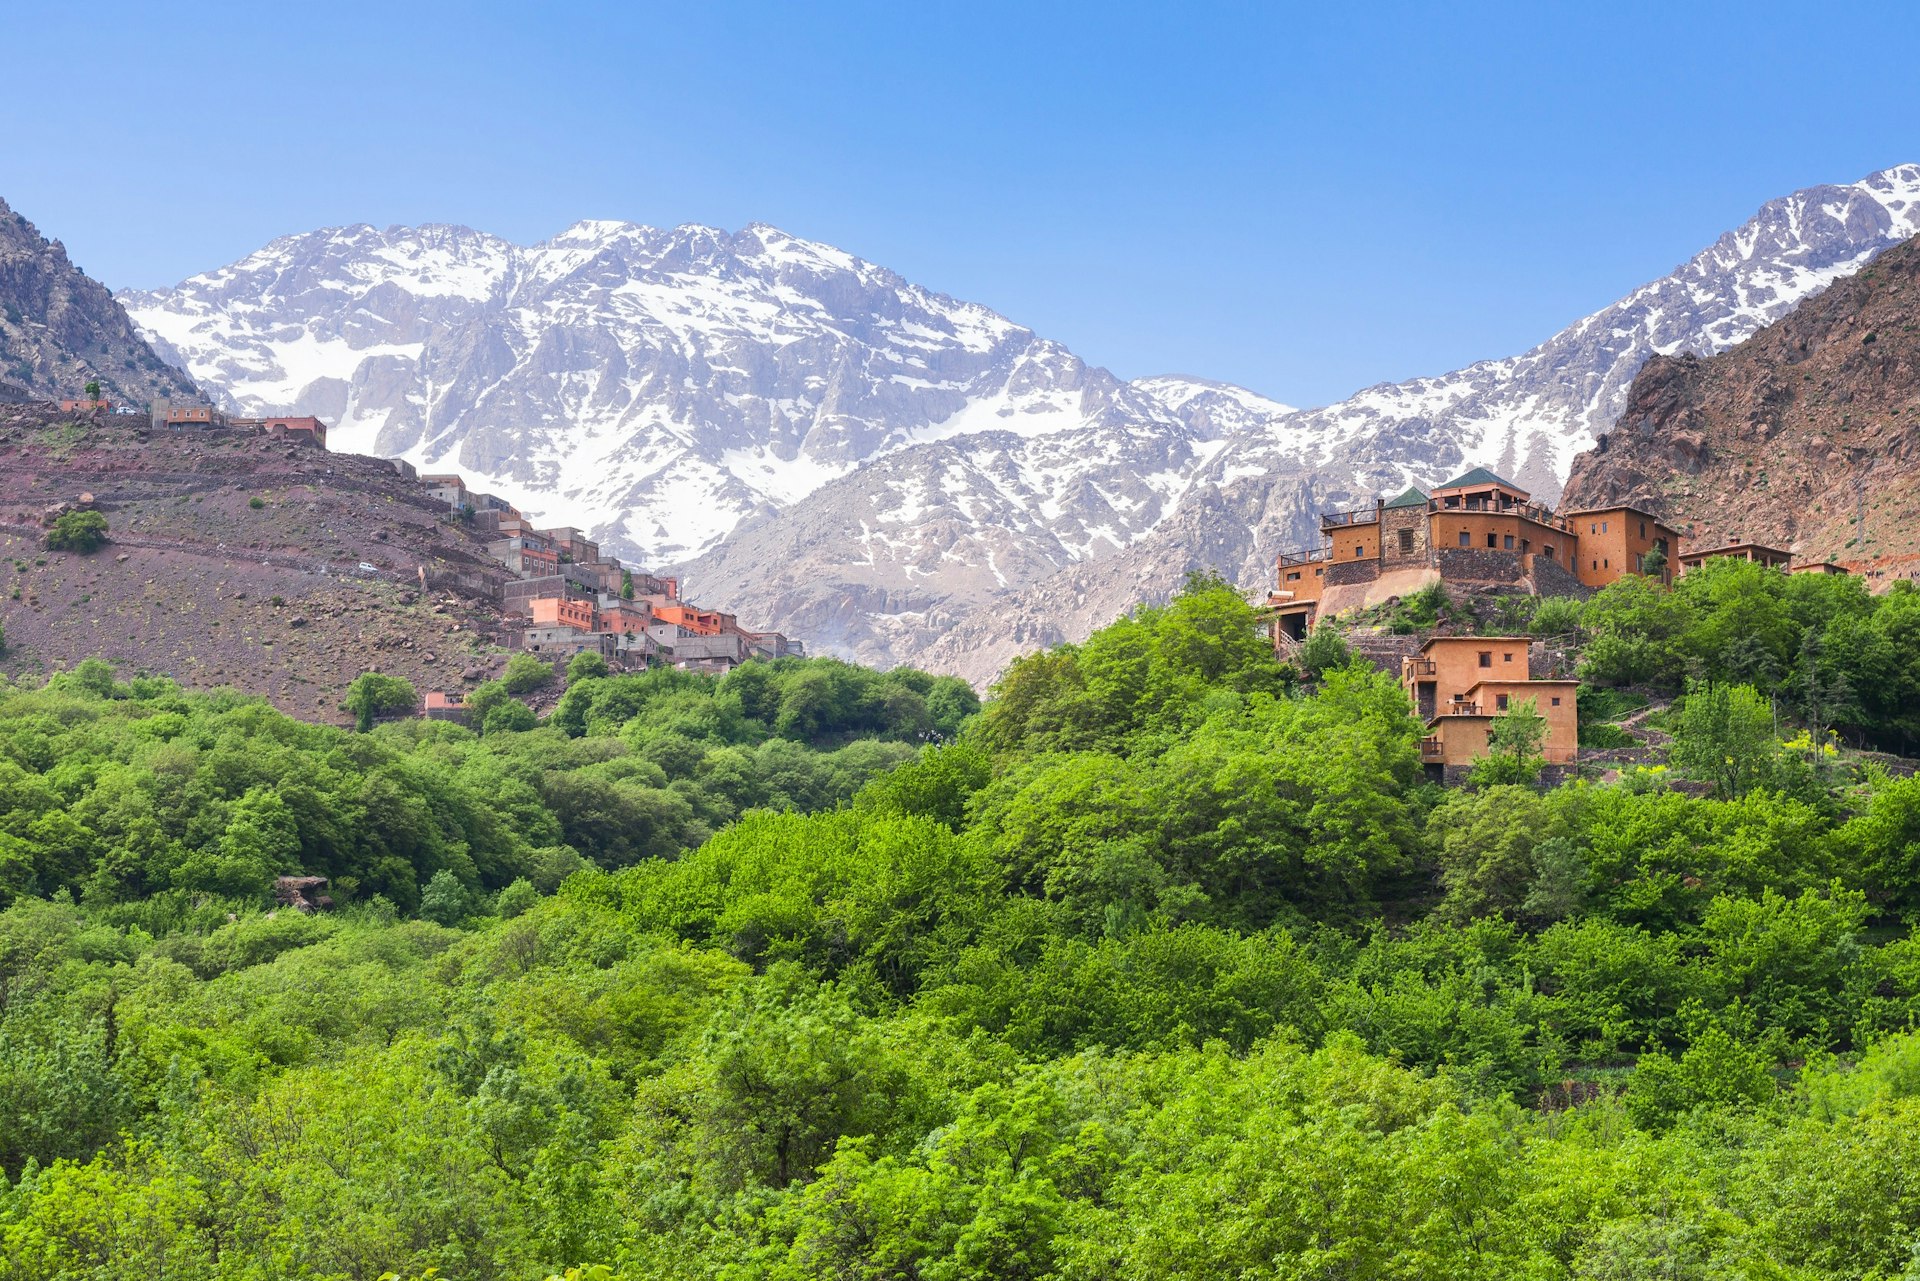 Traditional clay-brick houses stand atop a forested slope and along a rocky ridge, with the snow-capped summit of Toubkal towering in the background.